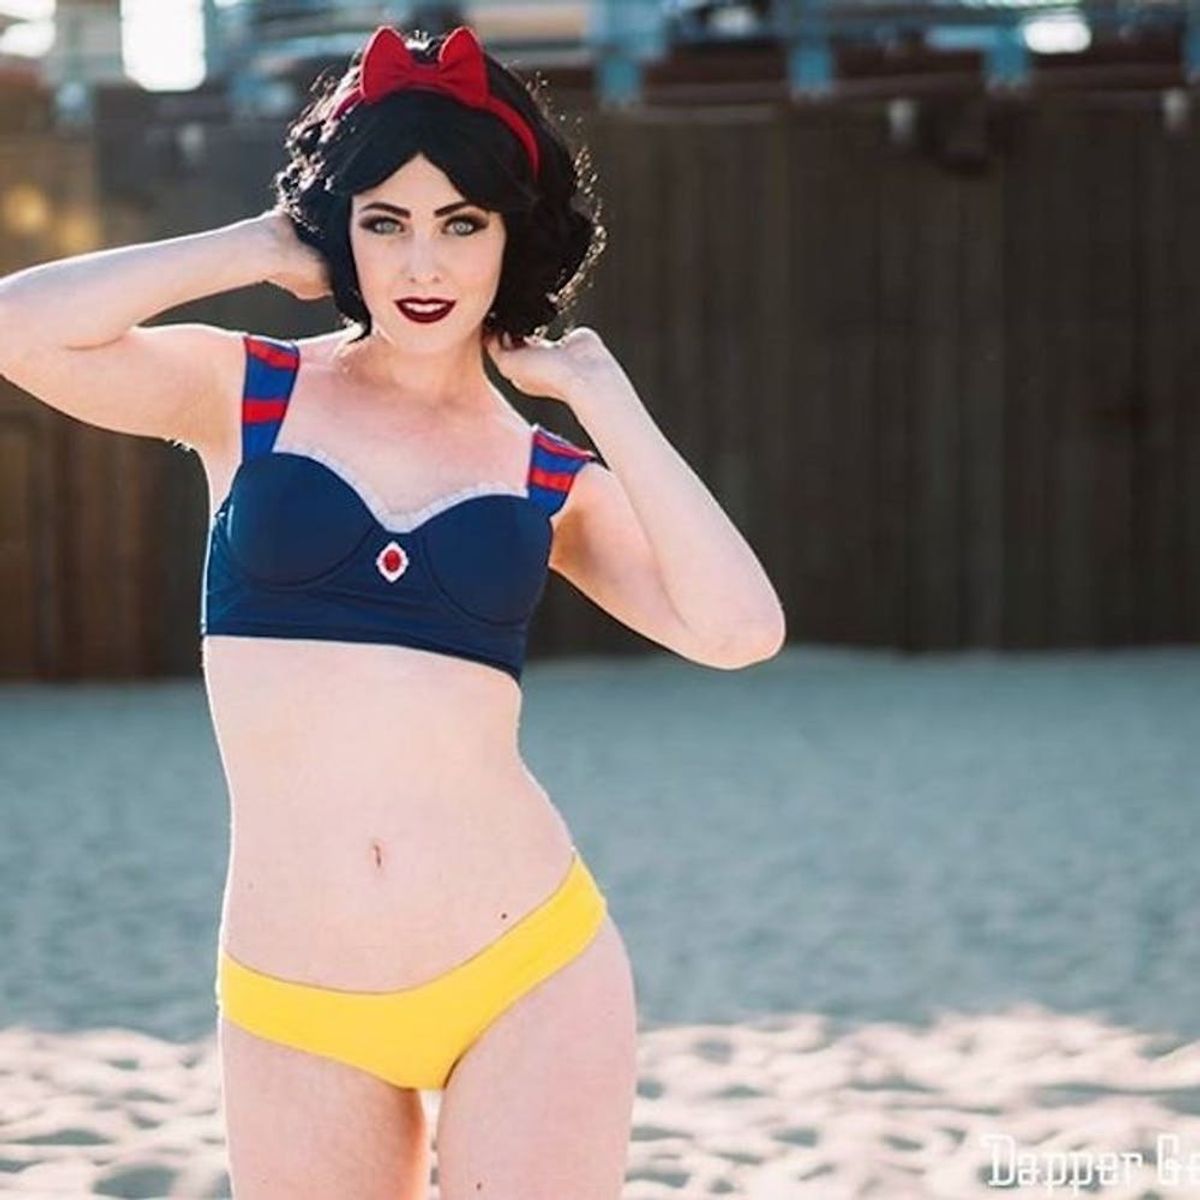 These Disney Princess Bikinis Are Here to Let You Unleash Your Inner Ariel